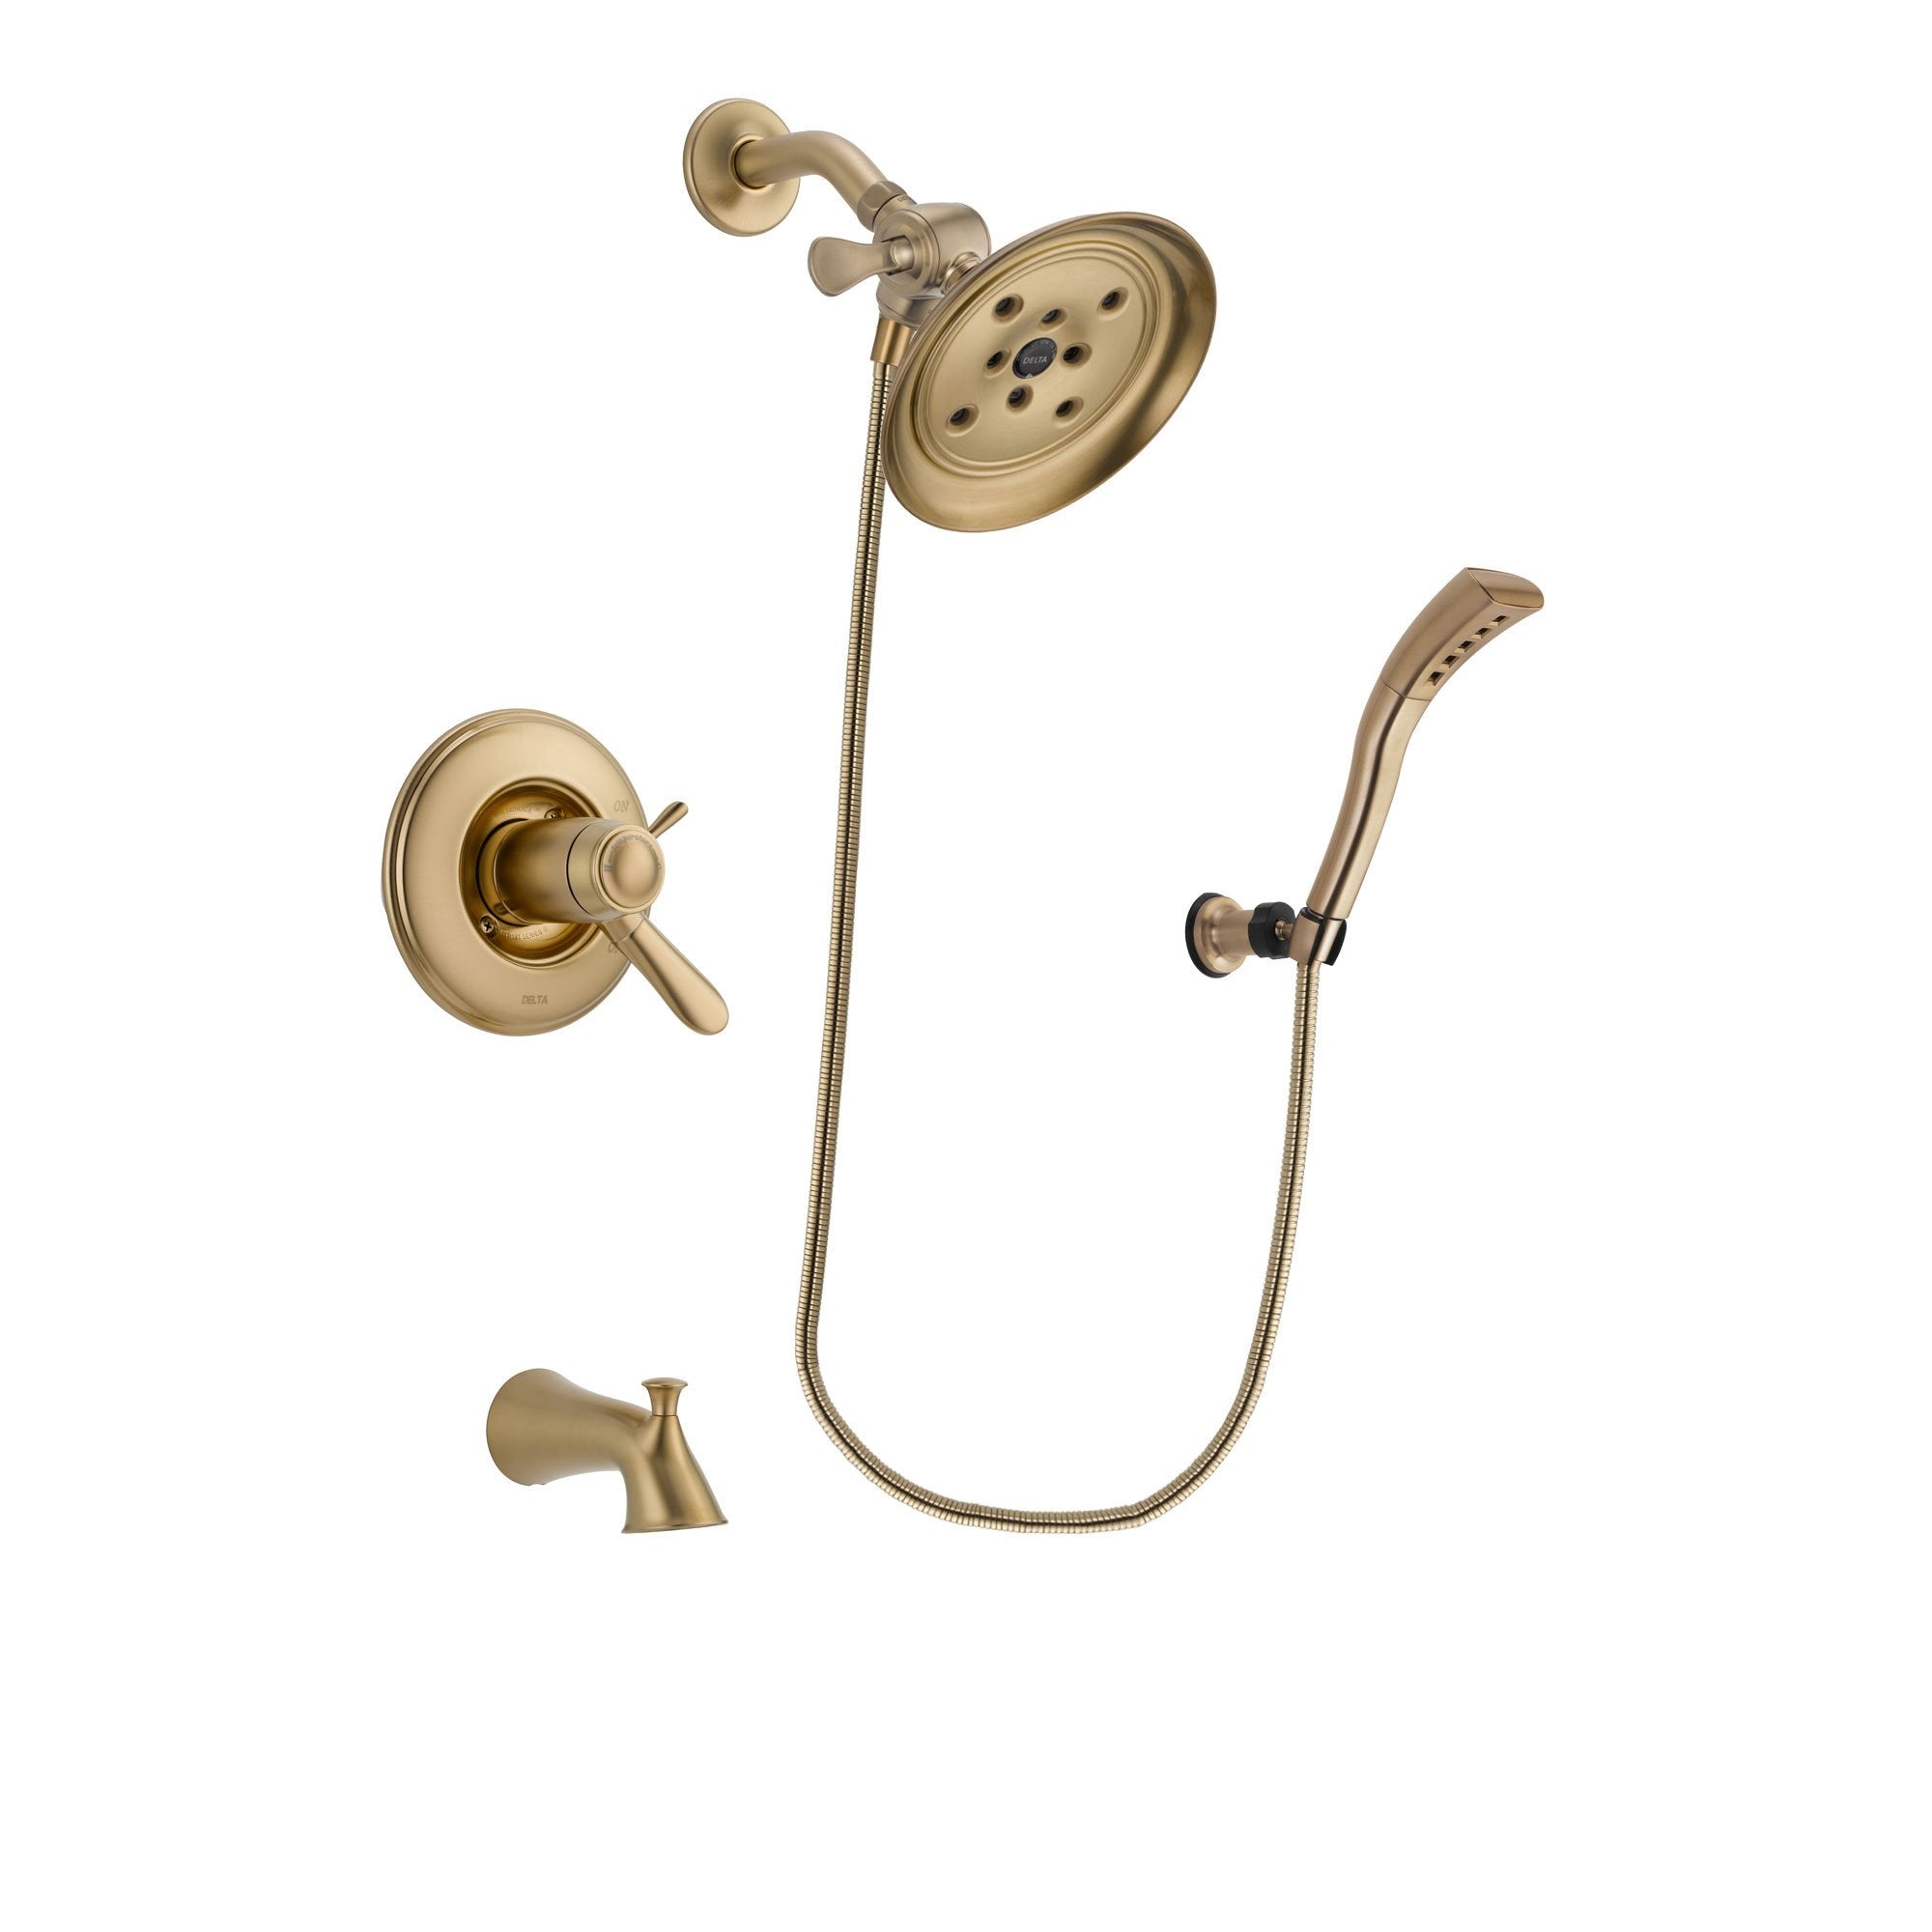 Delta Lahara Champagne Bronze Finish Thermostatic Tub and Shower Faucet System Package with Large Rain Shower Head and Modern Wall Mount Personal Handheld Shower Spray Includes Rough-in Valve and Tub Spout DSP3681V